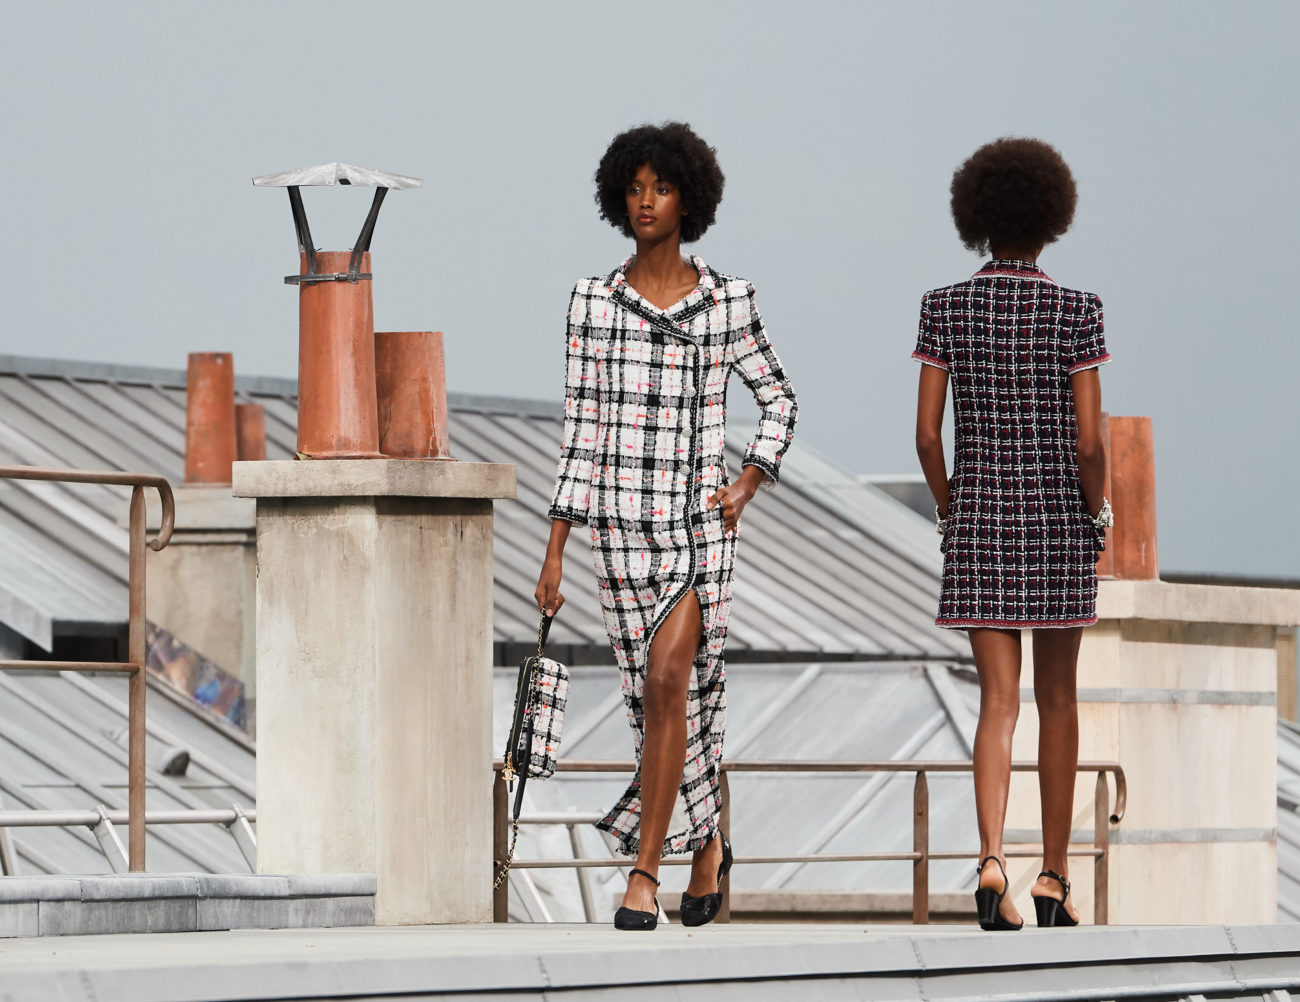 Chanel Spring Summer 2020 Collection, Courtesy of Chanel